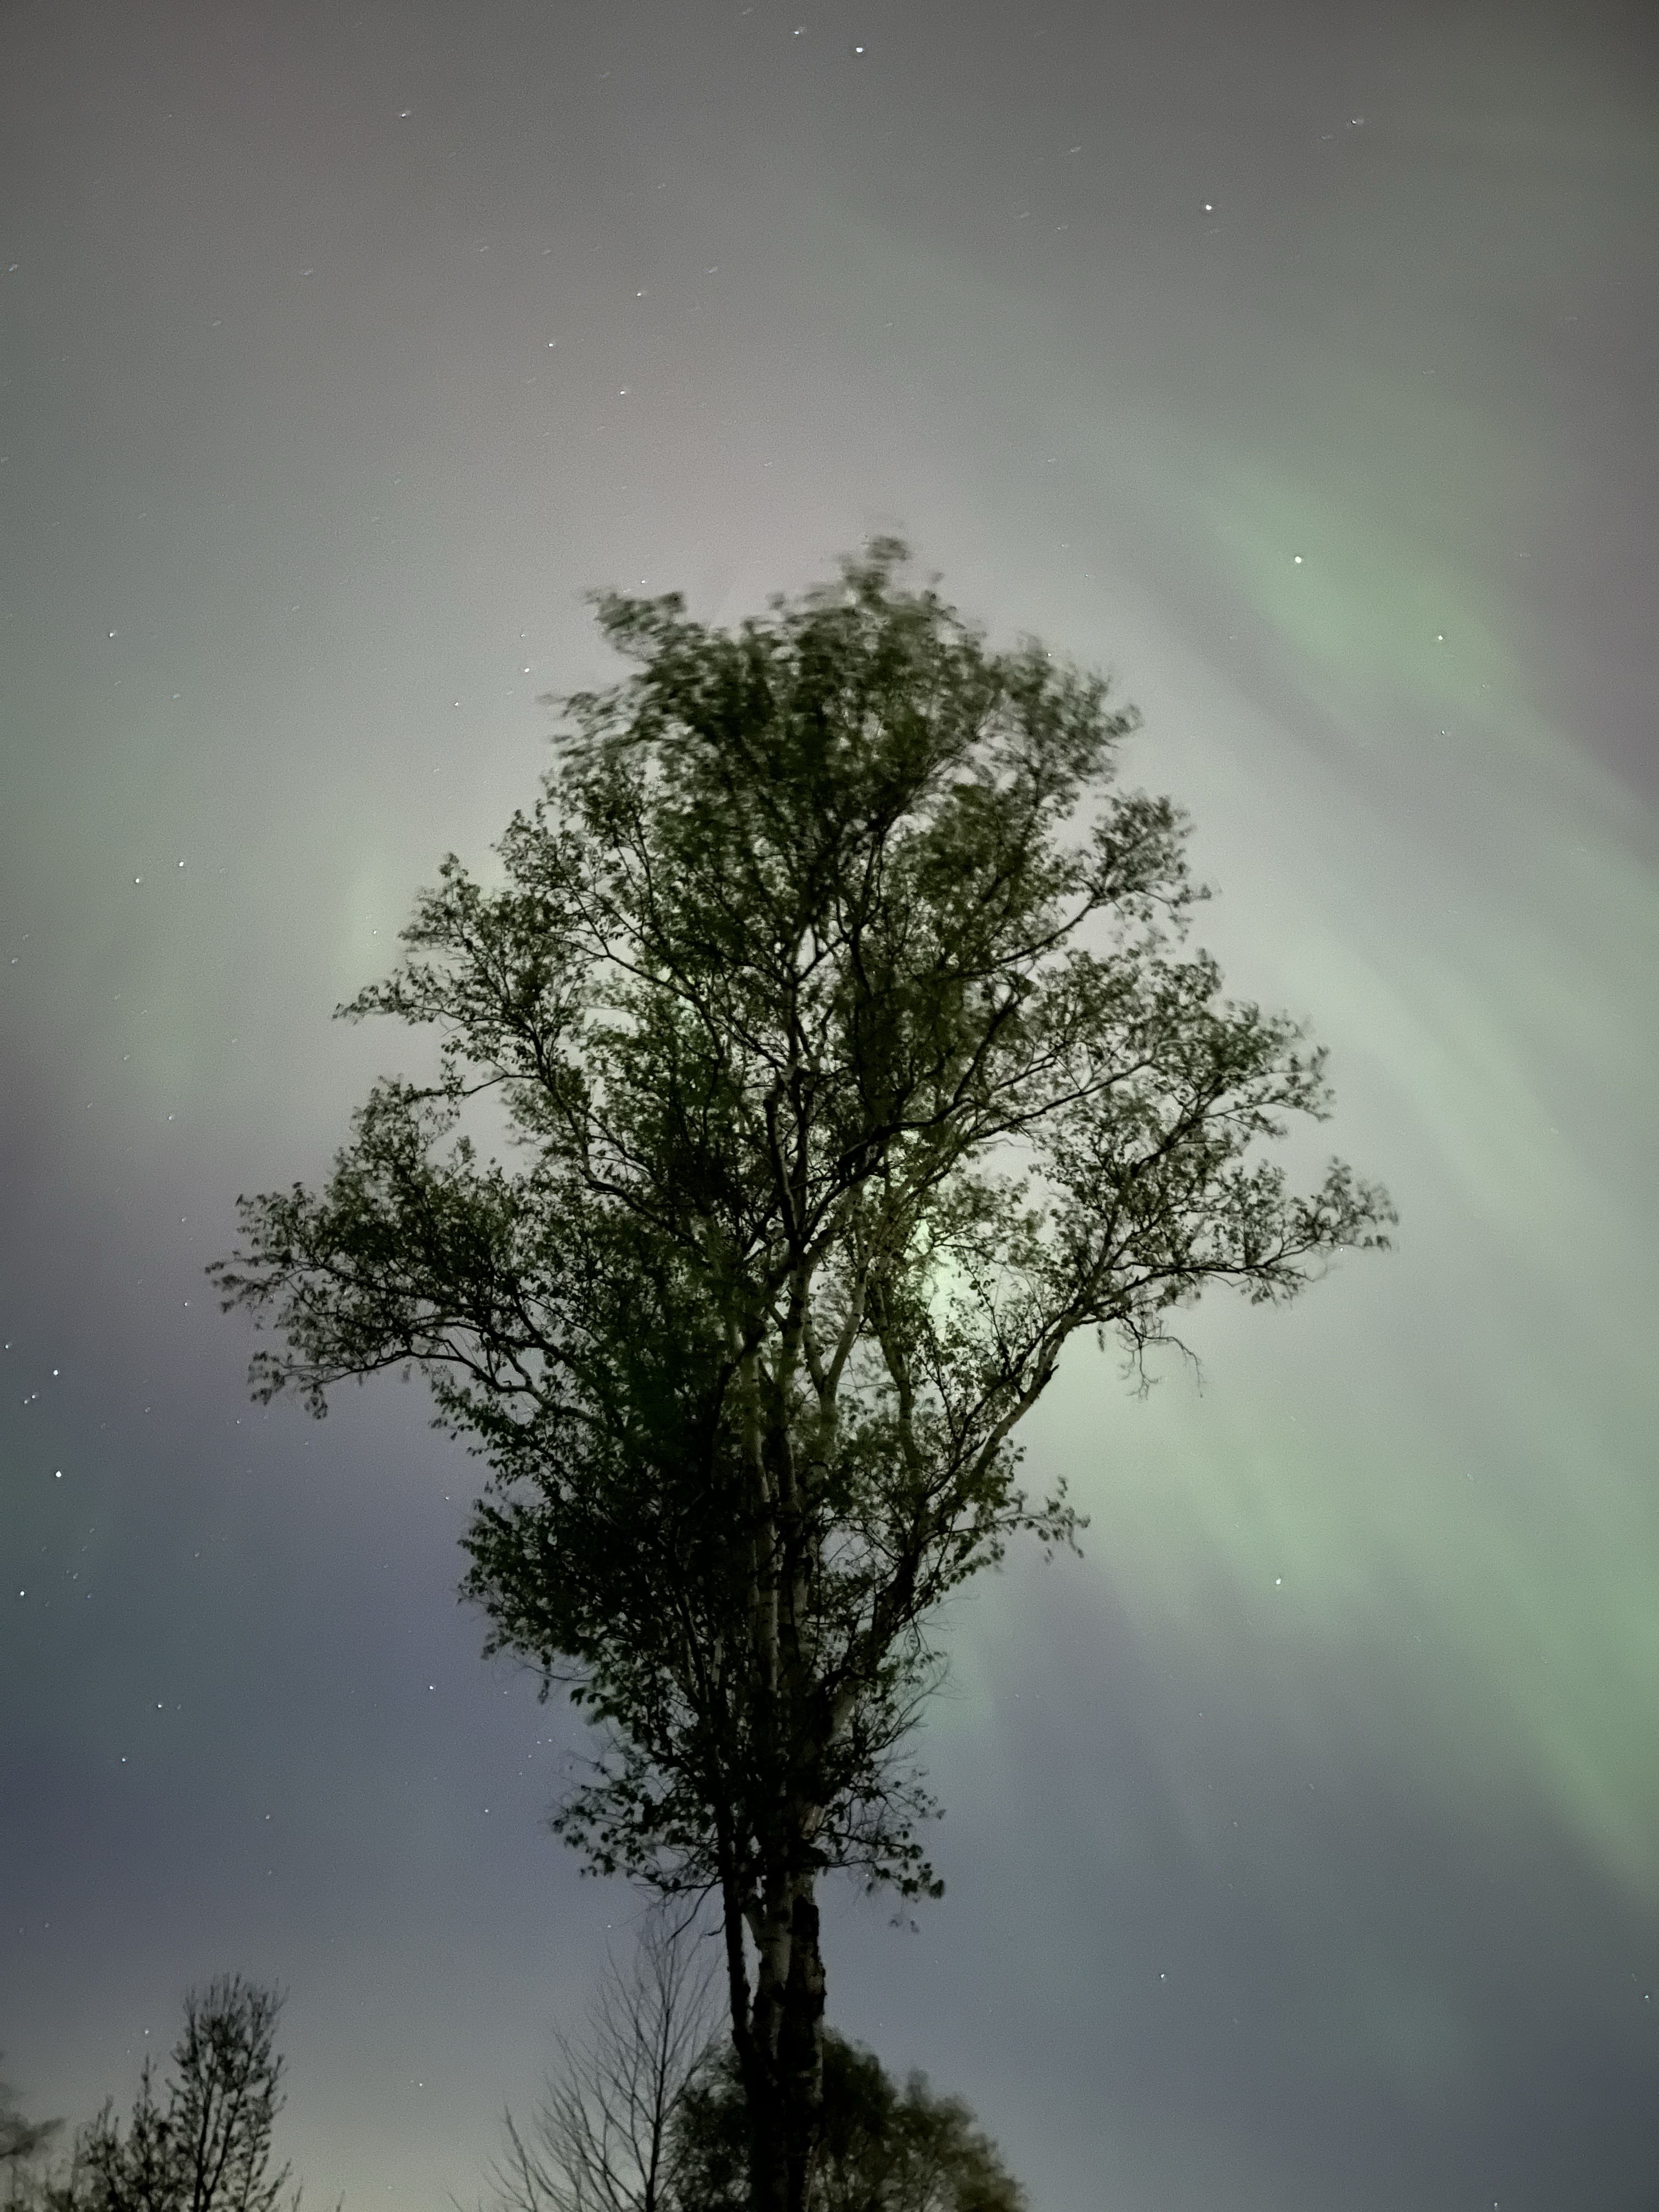 The northern lights, seen from Wisconsin, with a tree in the foreground.